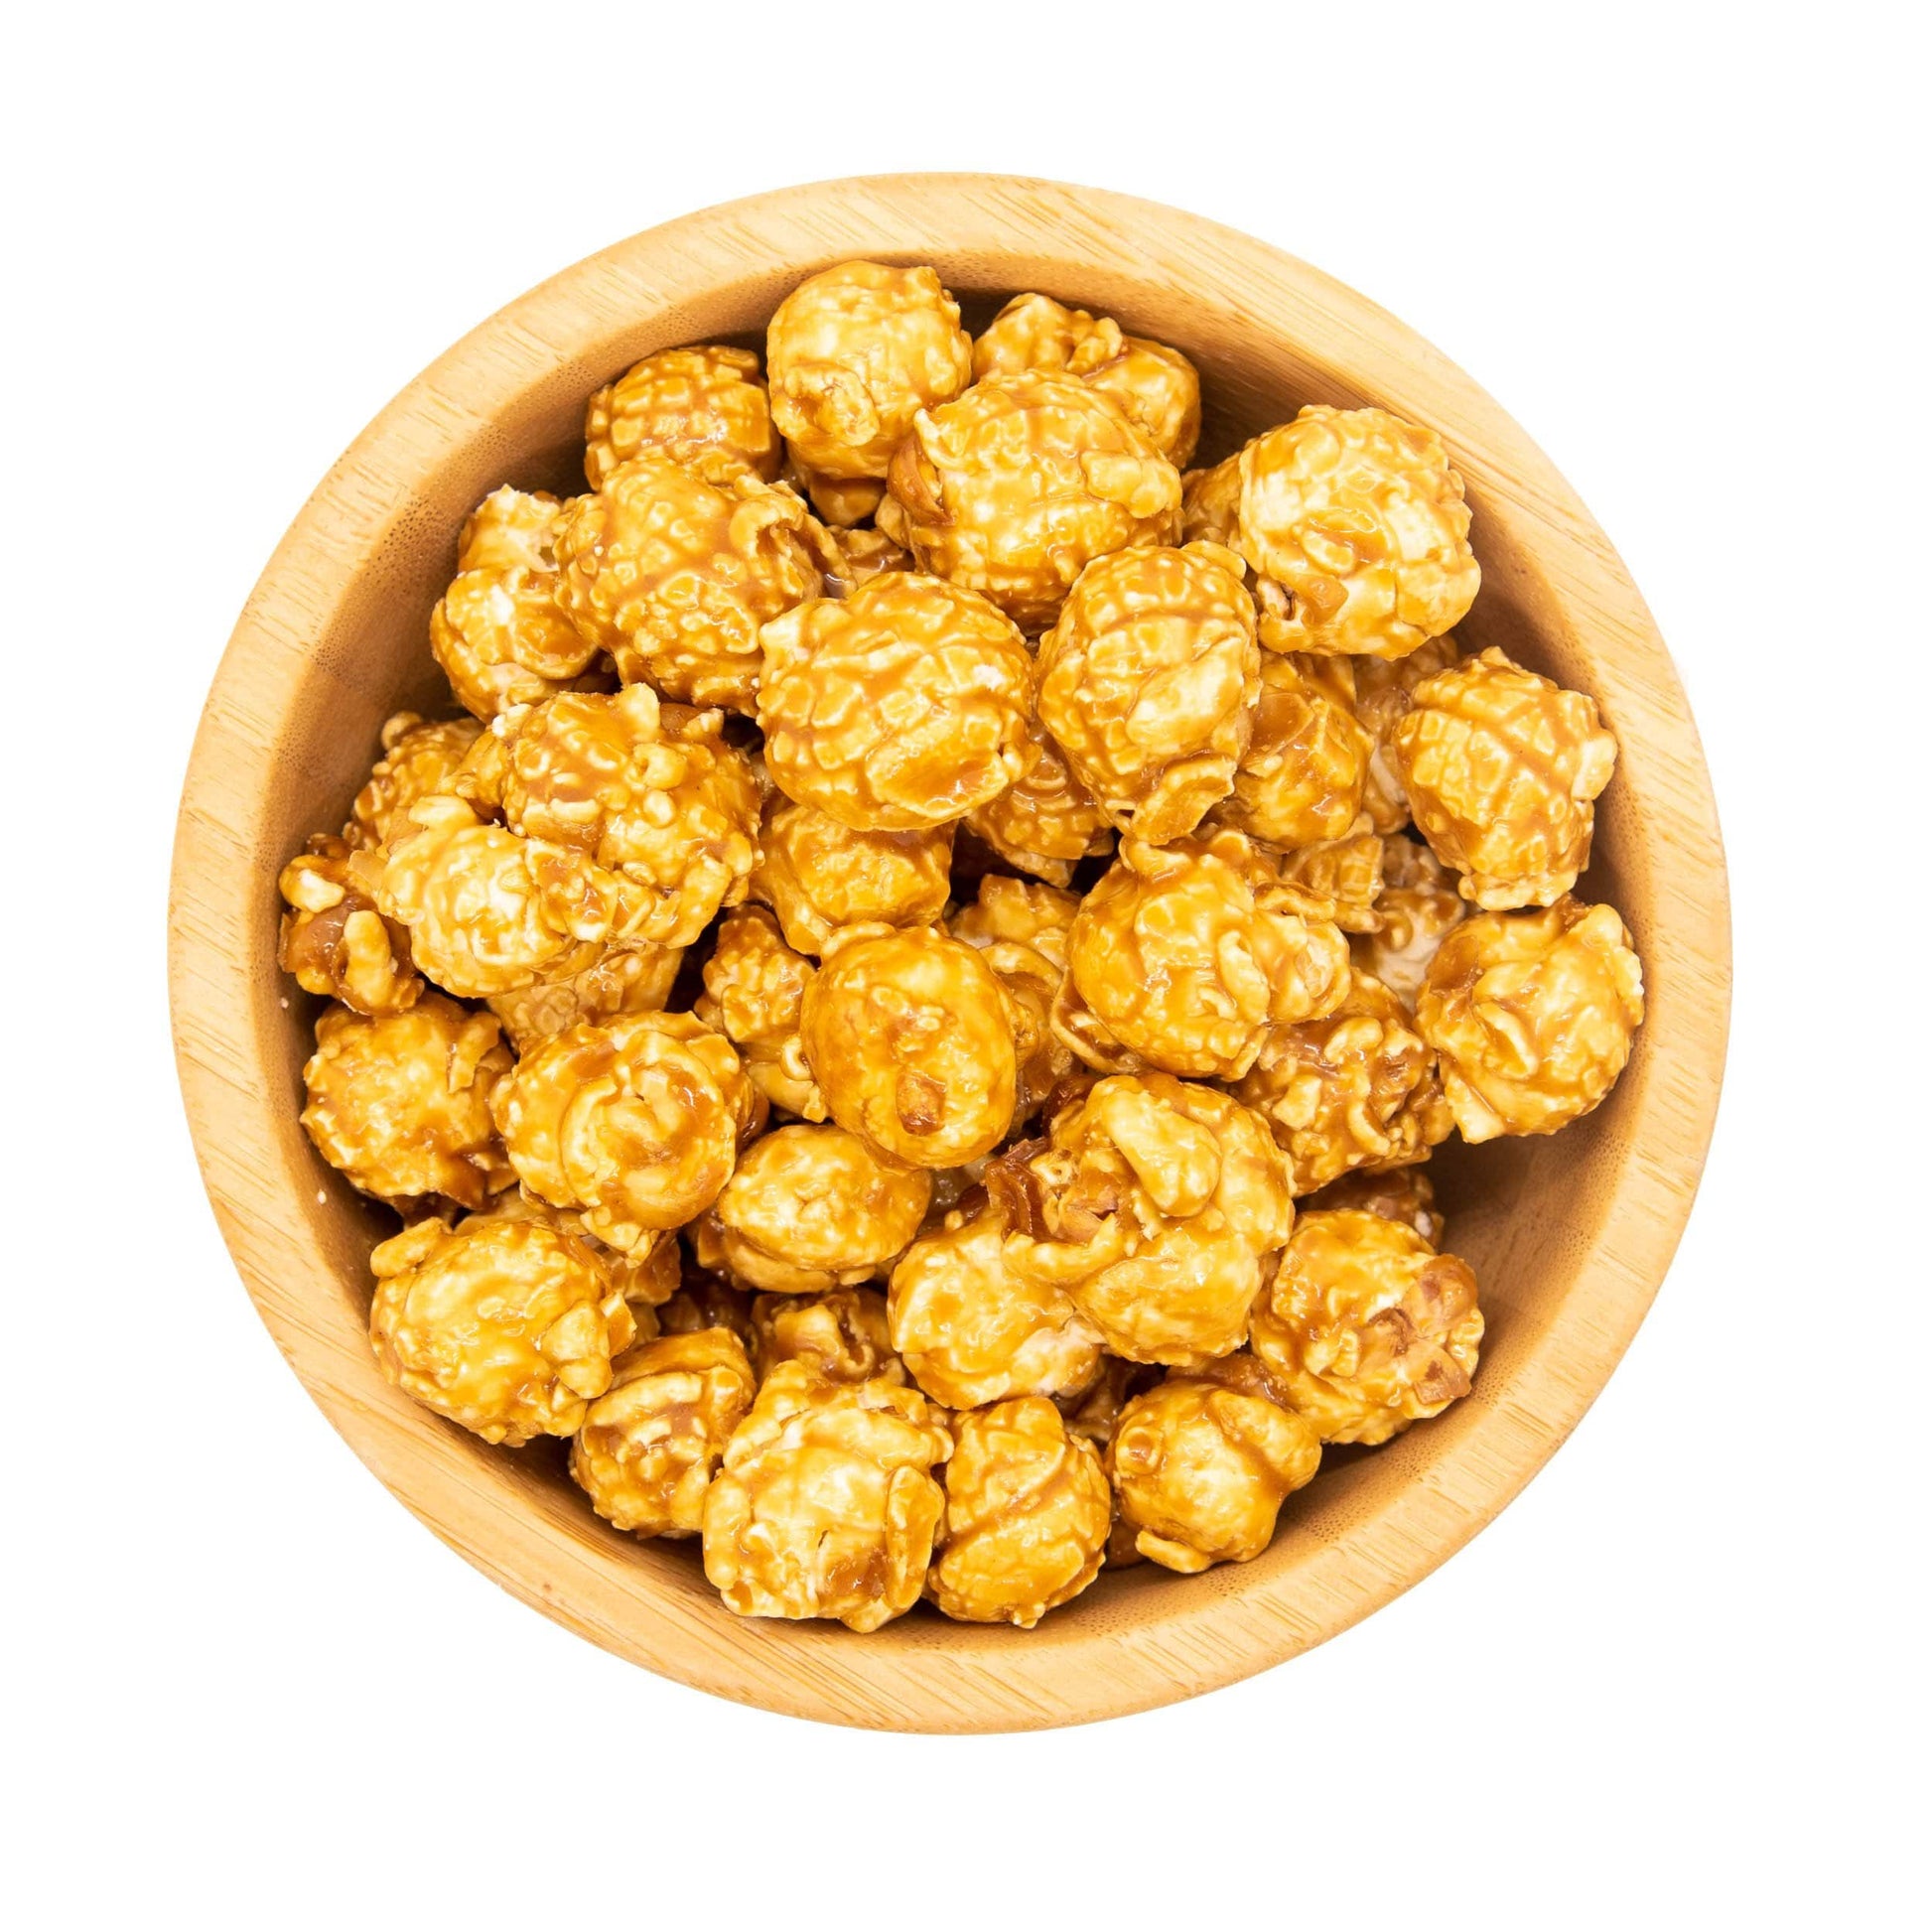 Double good Fundraising Caramel popcorn is the best popcorn fundraiser for schools and organizations